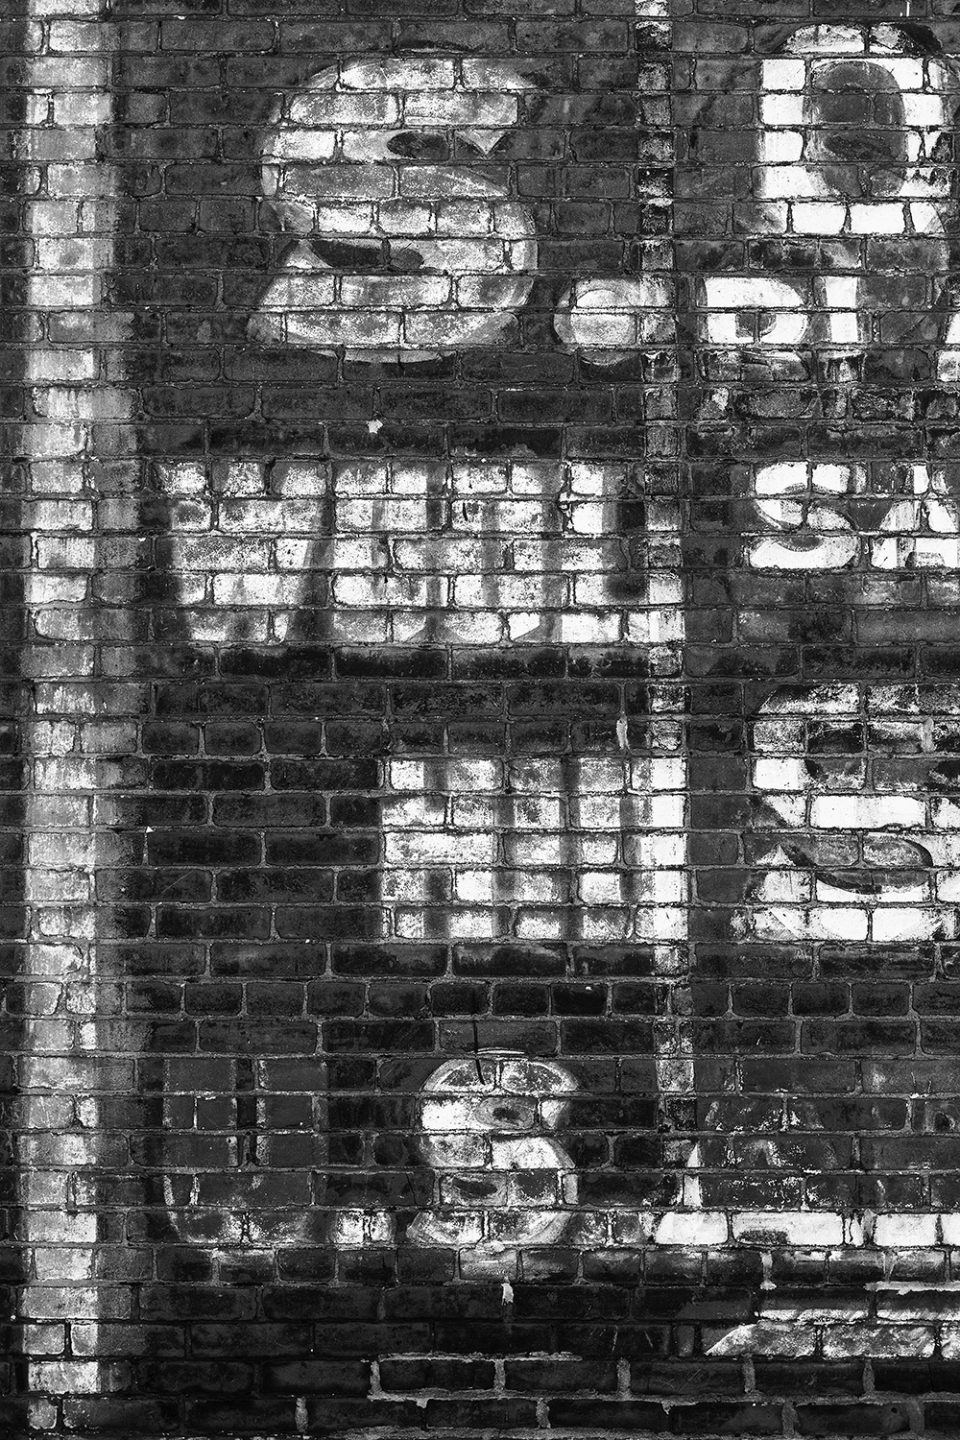 Black and white photograph of overlaid ghost signs for a variety of products and businesses, including Red Spot Paints, and saddles and horse blankets.